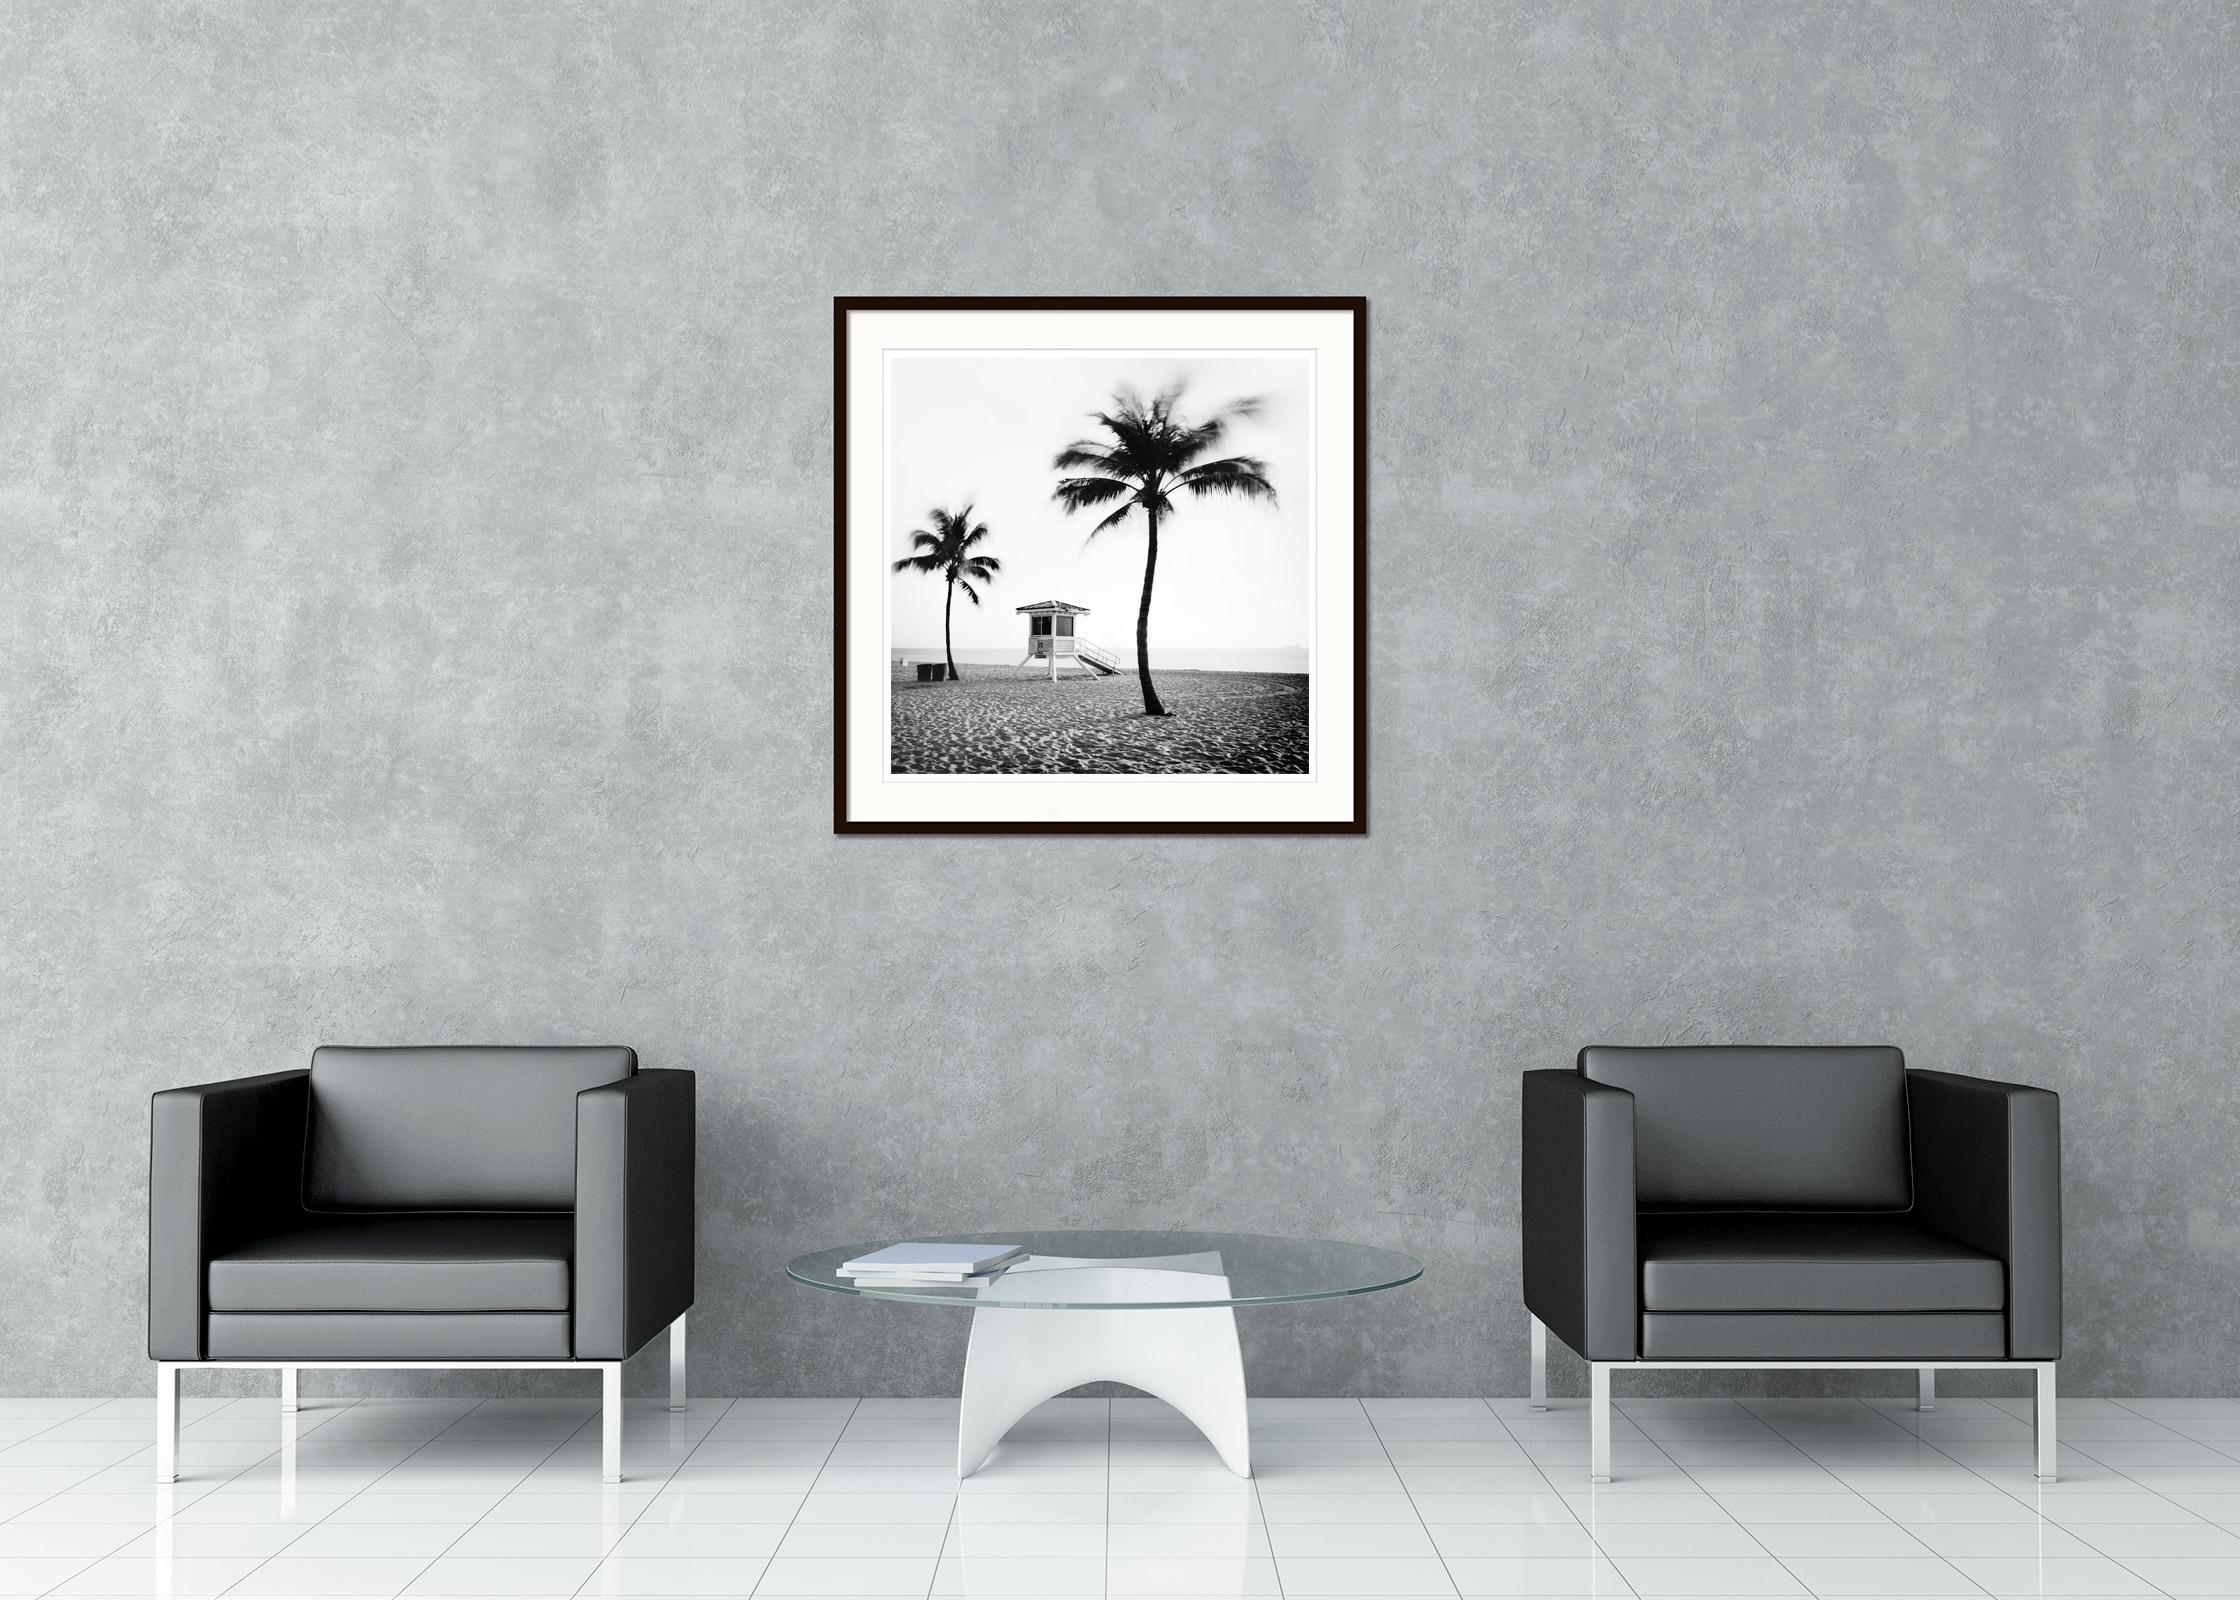 Black and white fine art landscape photography. Fort Lauderdale Beach with lifeguard tower and palm trees, Florida, USA. Archival pigment ink print as part of a limited edition of 9. All Gerald Berghammer prints are made to order in limited editions